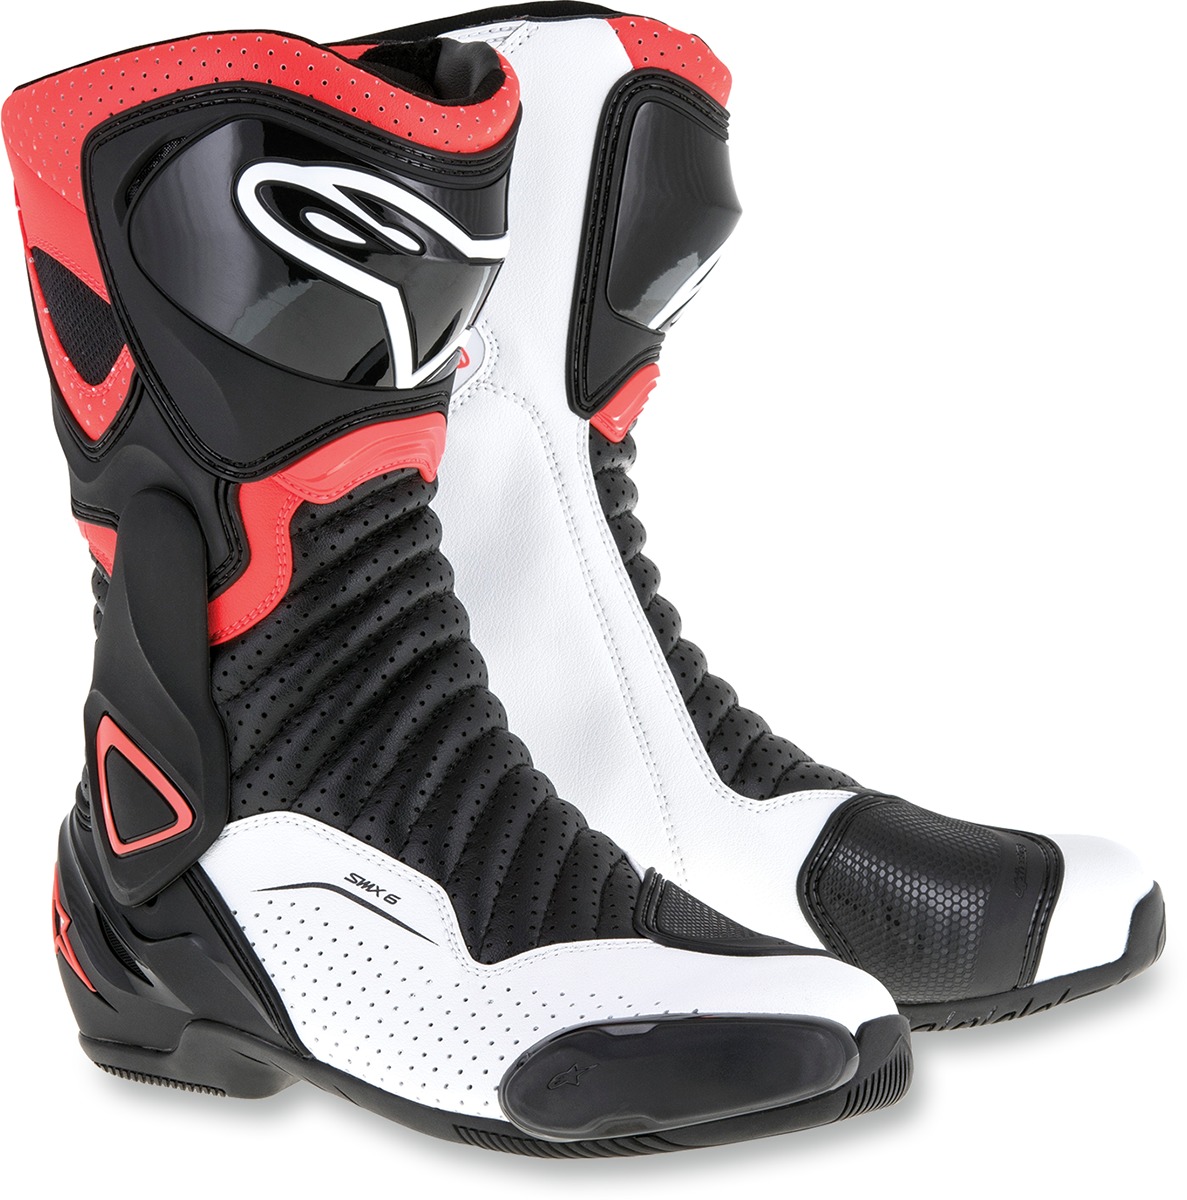 SMX-6v2 Vented Street Riding Boots Black/Red/White US 5 - Click Image to Close